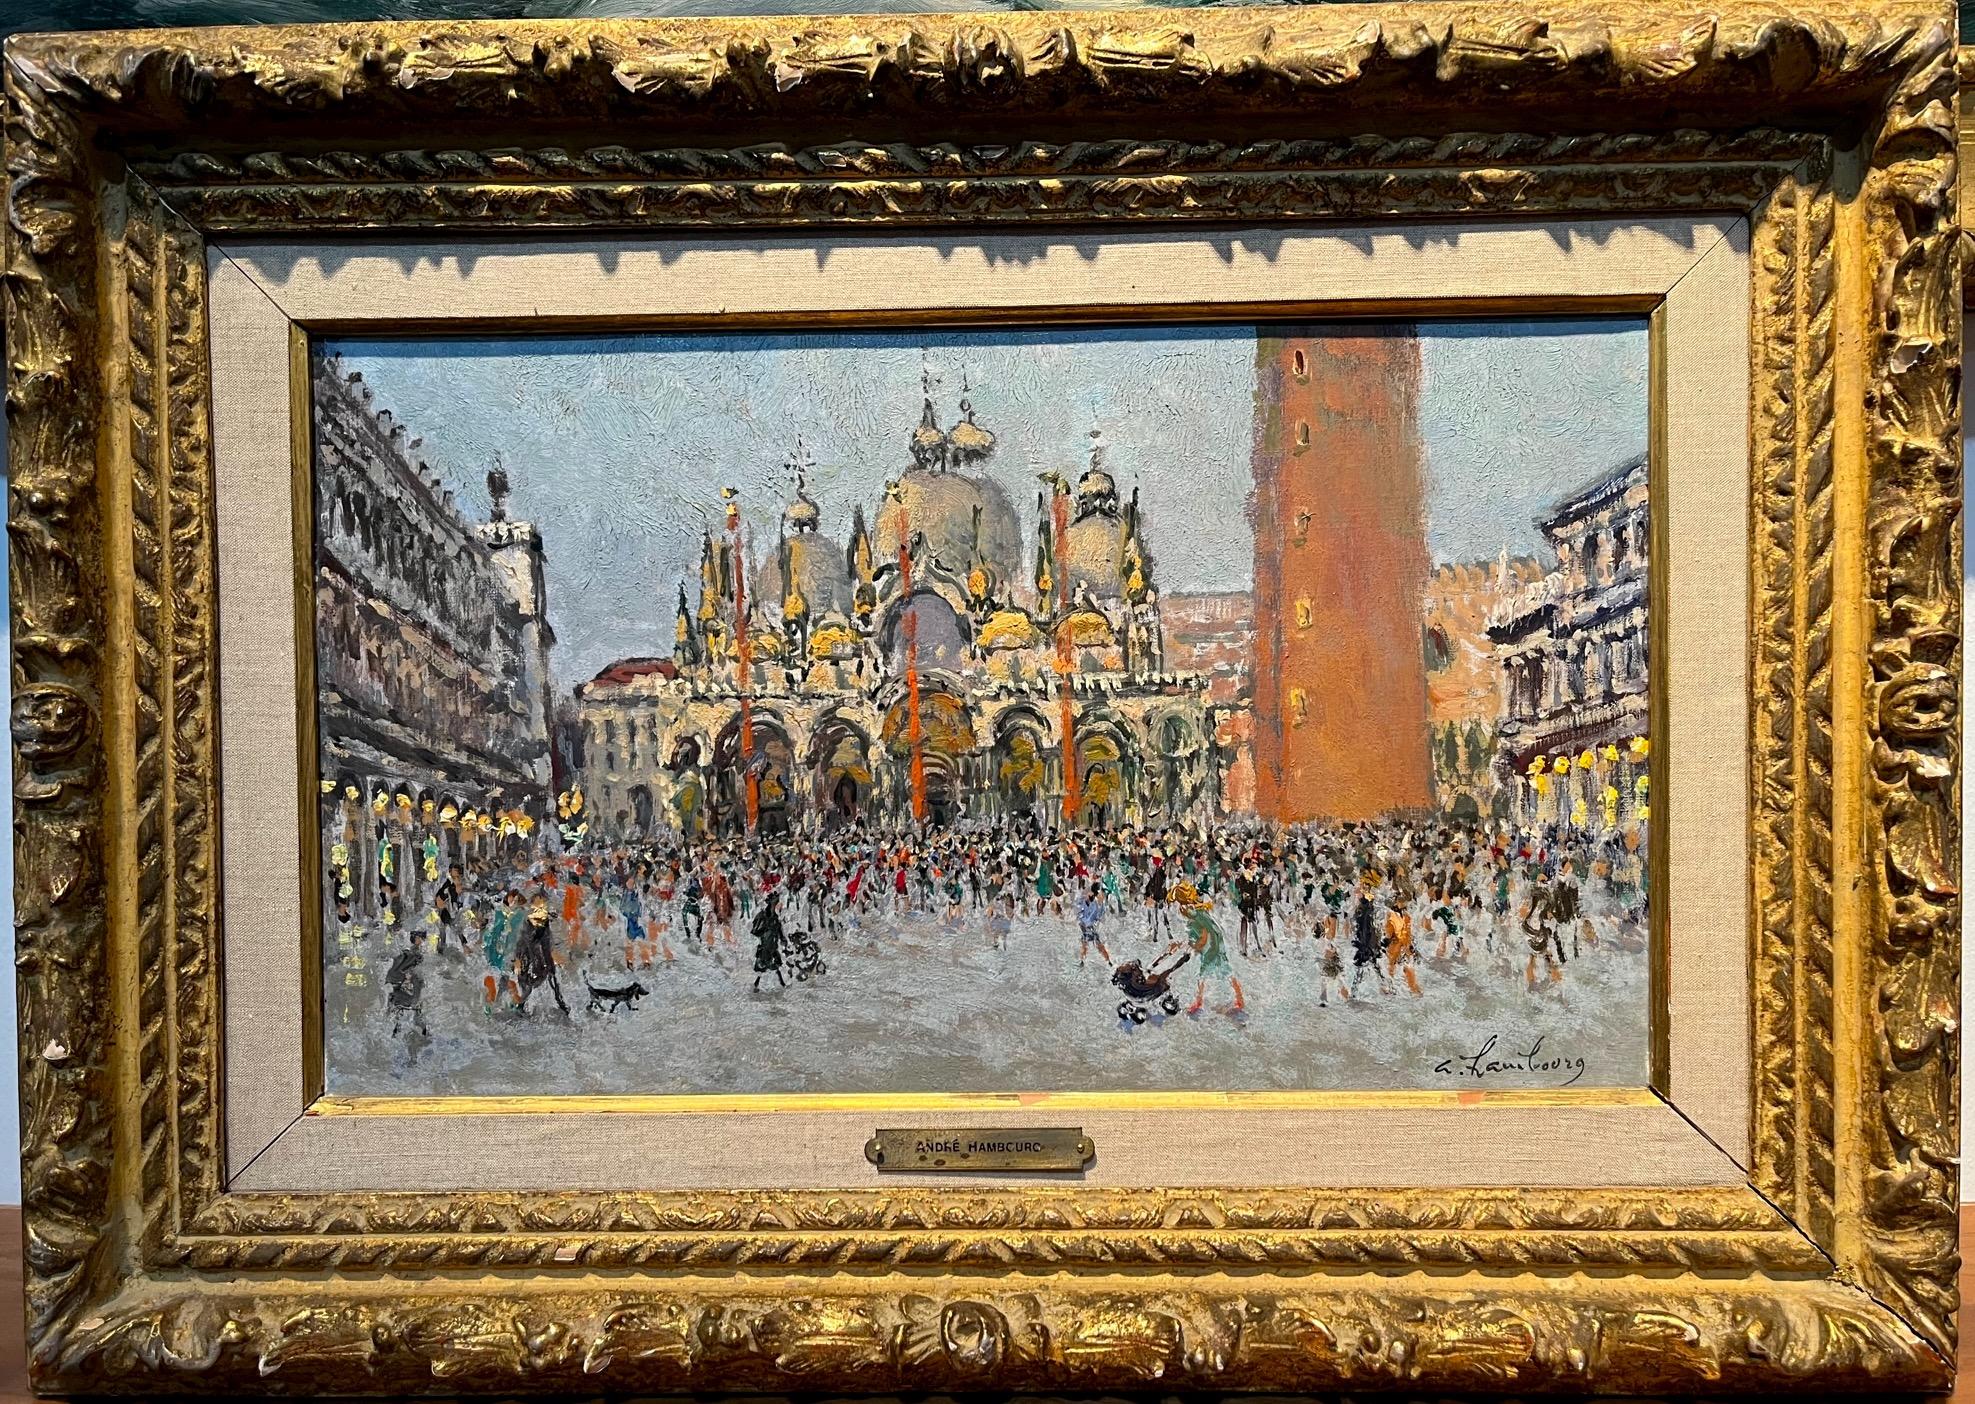 Saint Marks Square, Venice - Painting by Andre Hambourg